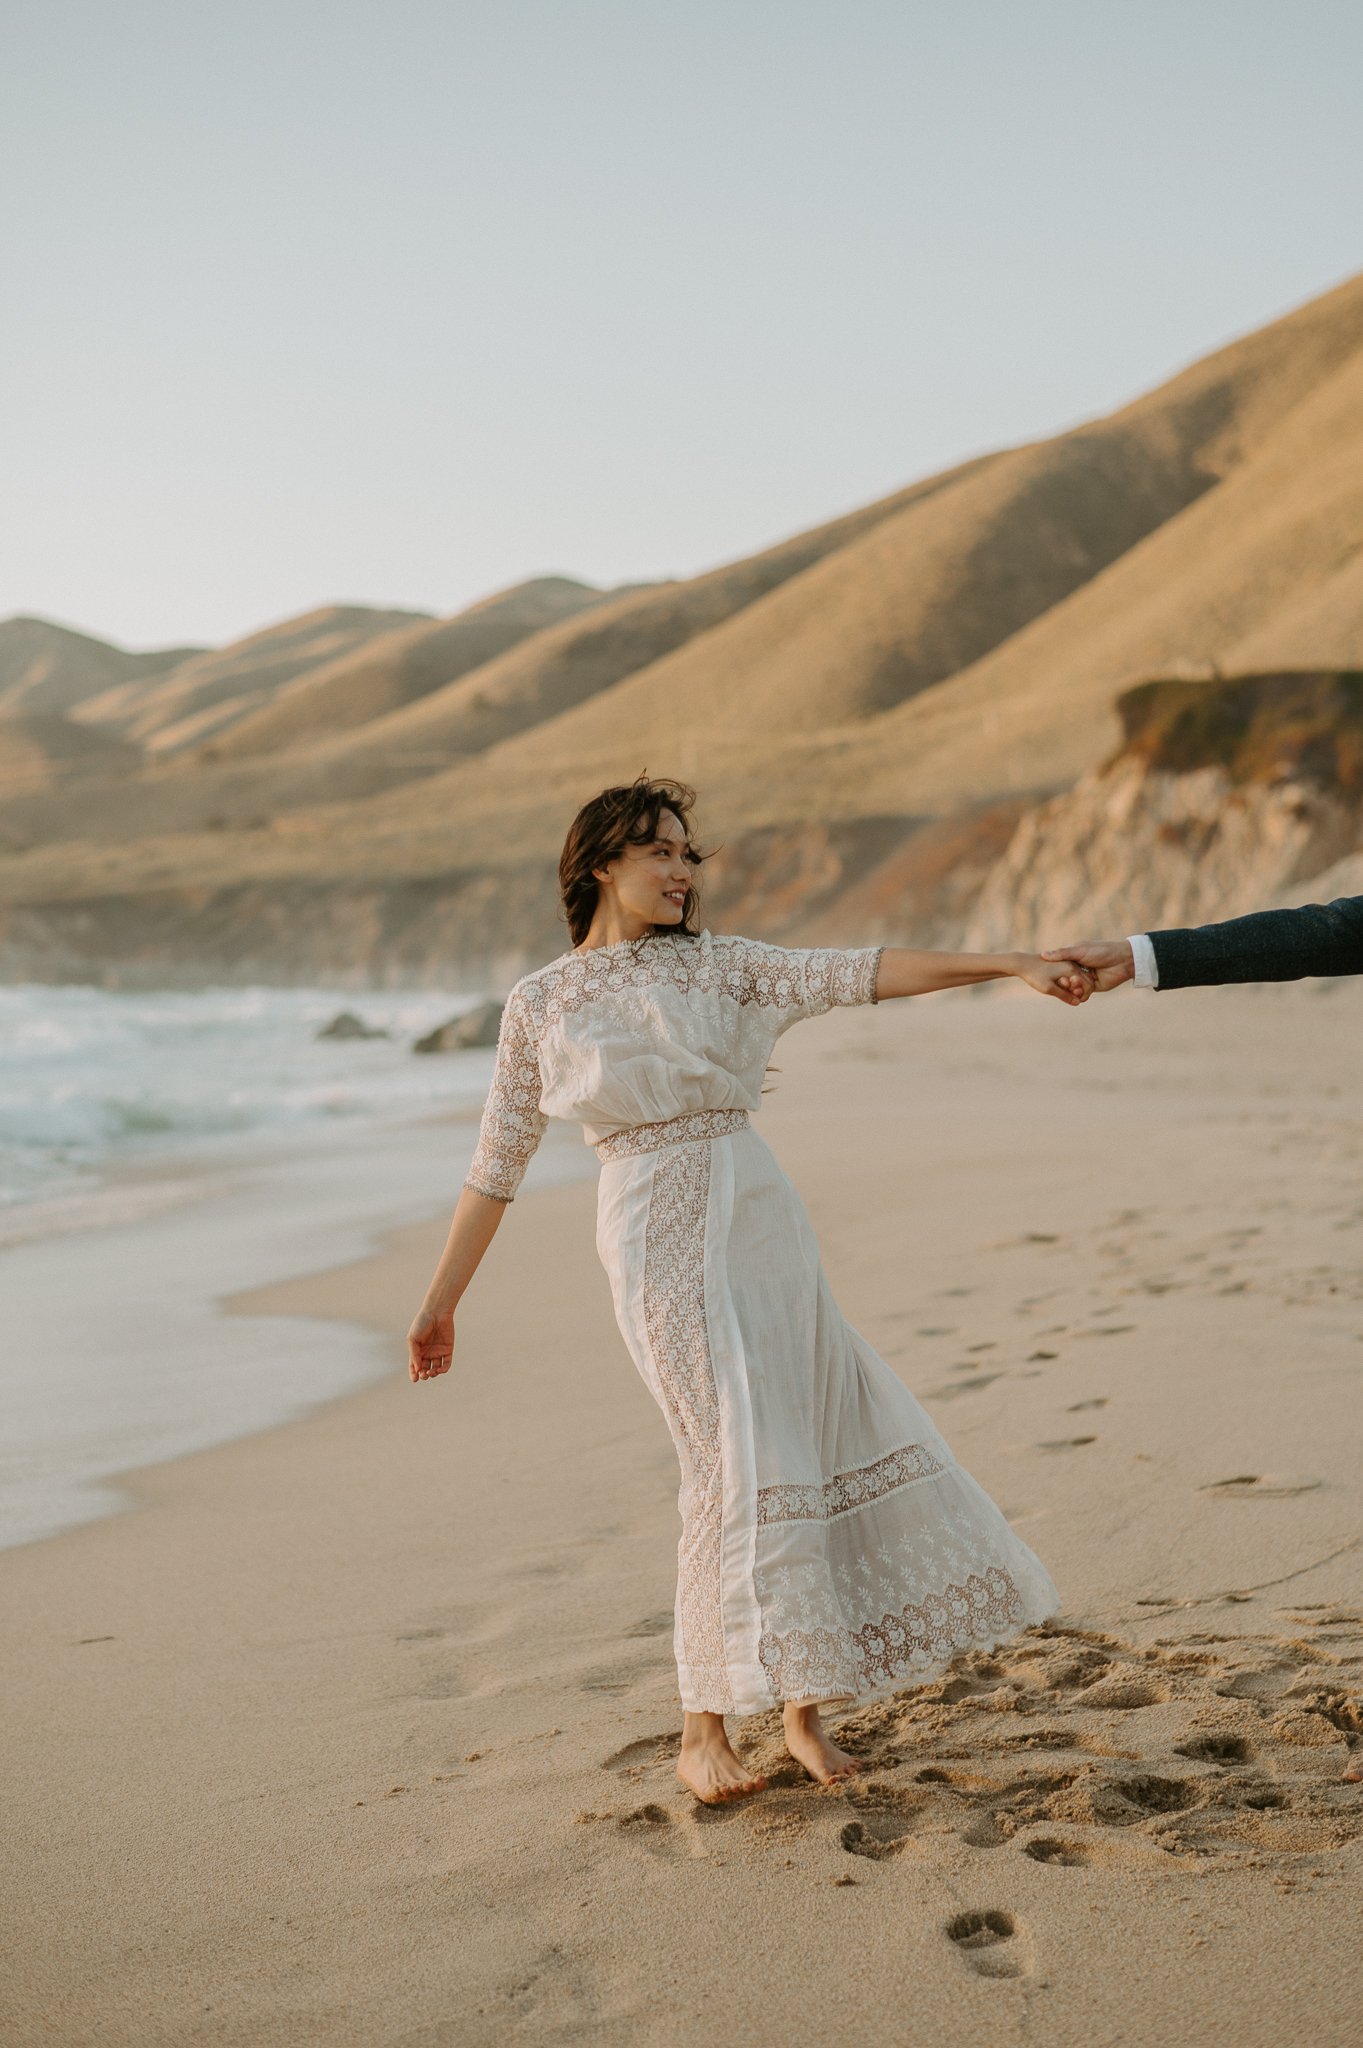 newly engaged woman holding her fiancé's hand he is not shown on beach in Big Sur